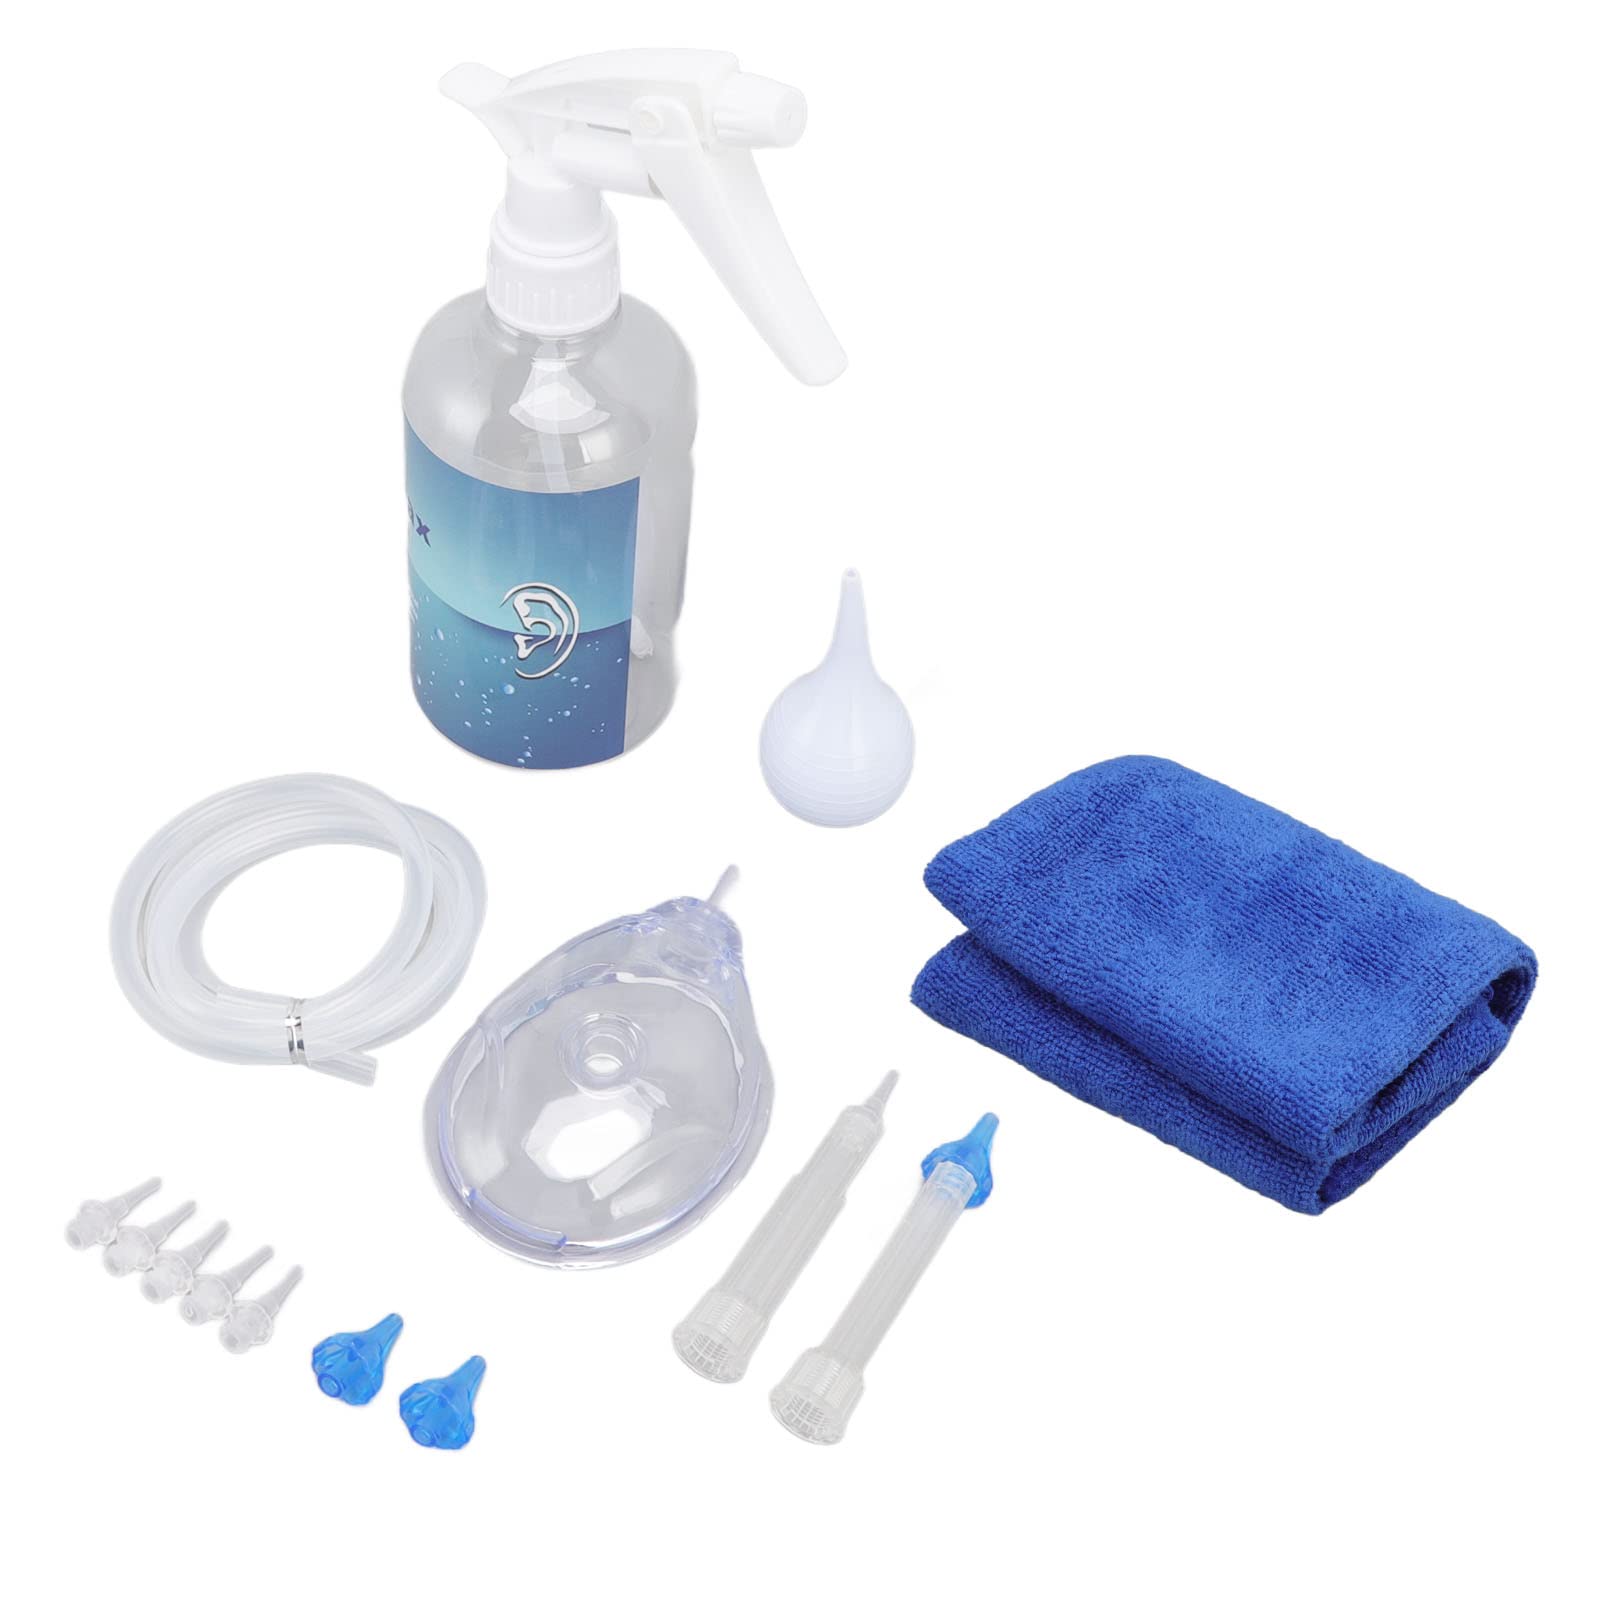 MIGONG Ear Cleaning Kits ABS and Silicone Earwax Cleaning Washer 500ml Ear  Washer Spray Bottle System